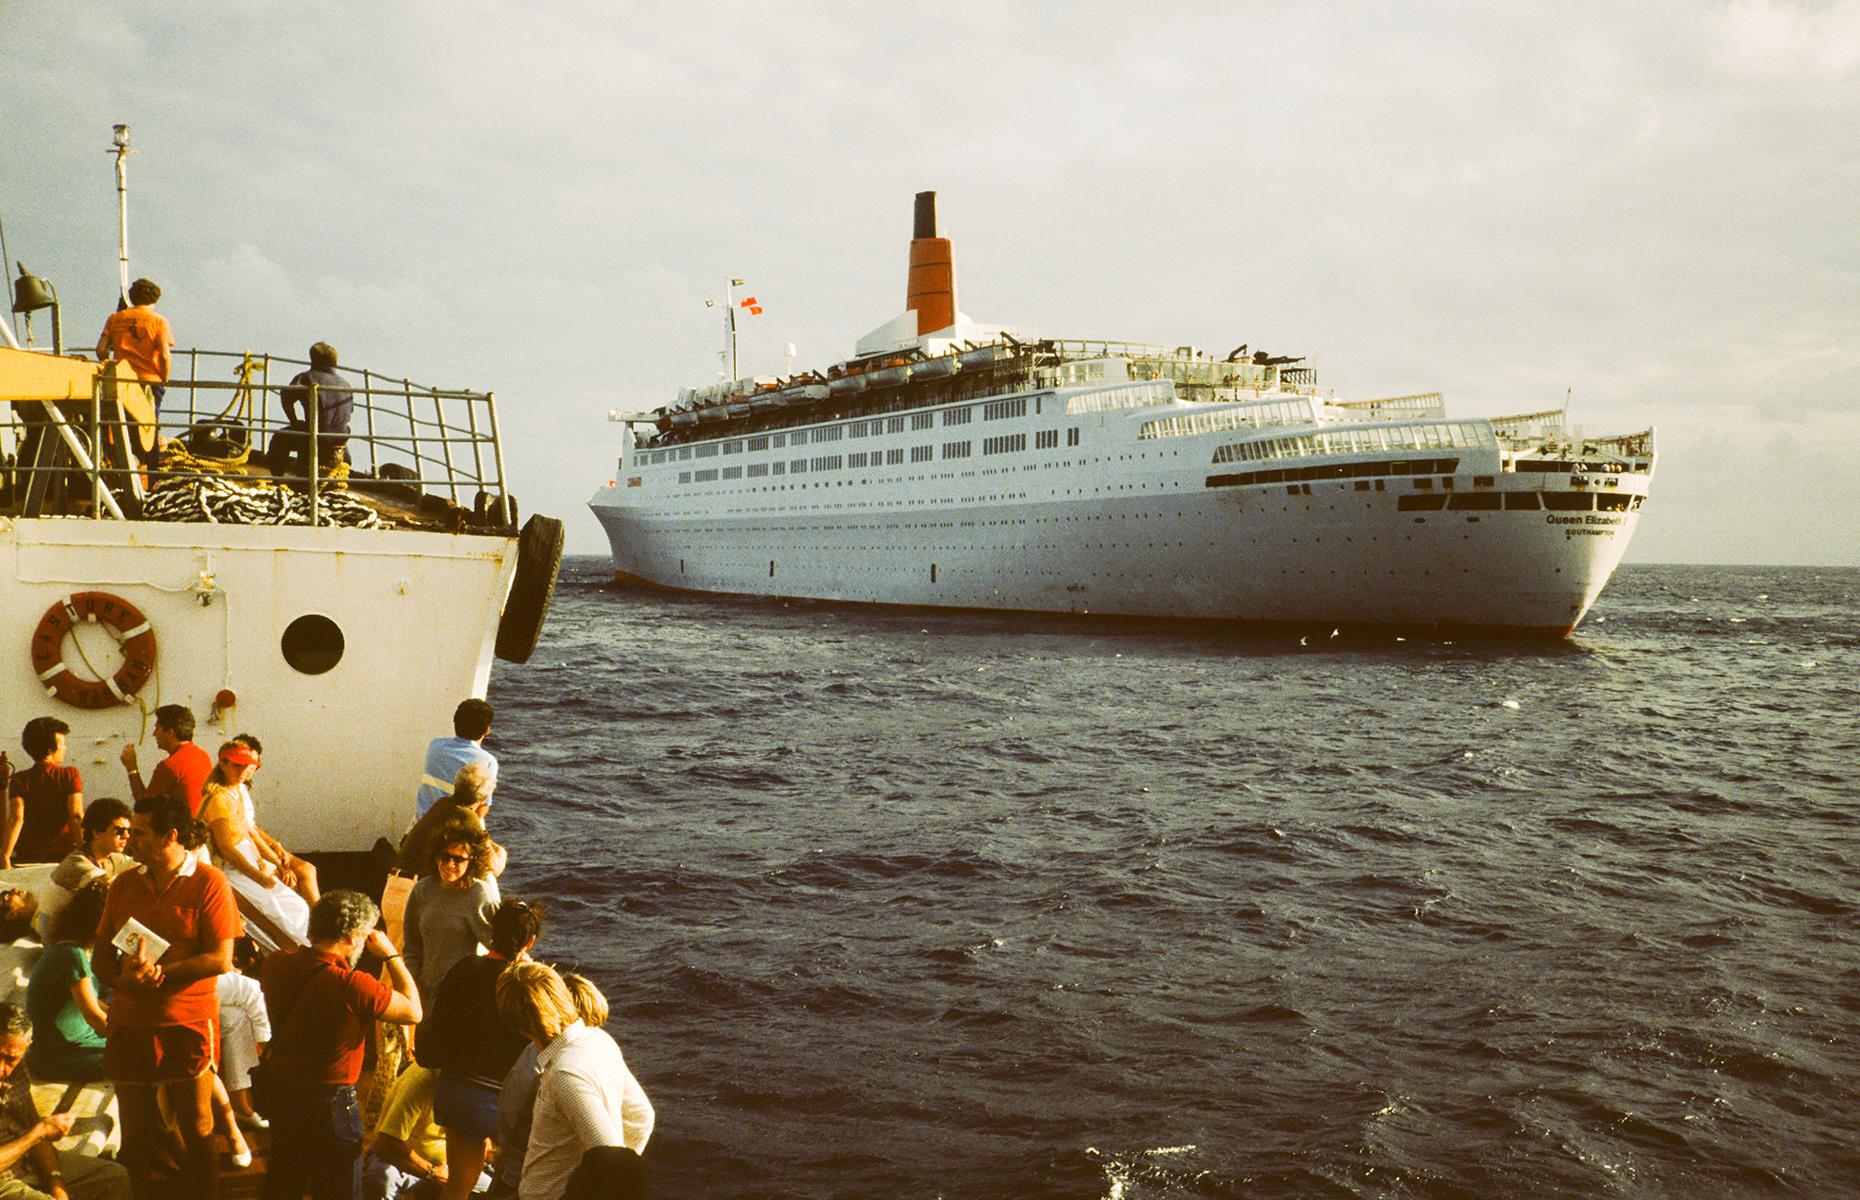 <p>As flying became more commonplace, the popularity of cruising looked set to dwindle. However, one particular TV series is often credited with keeping travelers' passion for cruising alive. <em>The Love Boat </em>– aired from the 1970s – was a comedy series that followed the crew and passengers of luxury liner SS Pacific Princess. Such was its popularity, some say it brought cruising back into the mainstream once more. This shot shows Cunard Line's Queen Elizabeth 2 in 1975. </p>